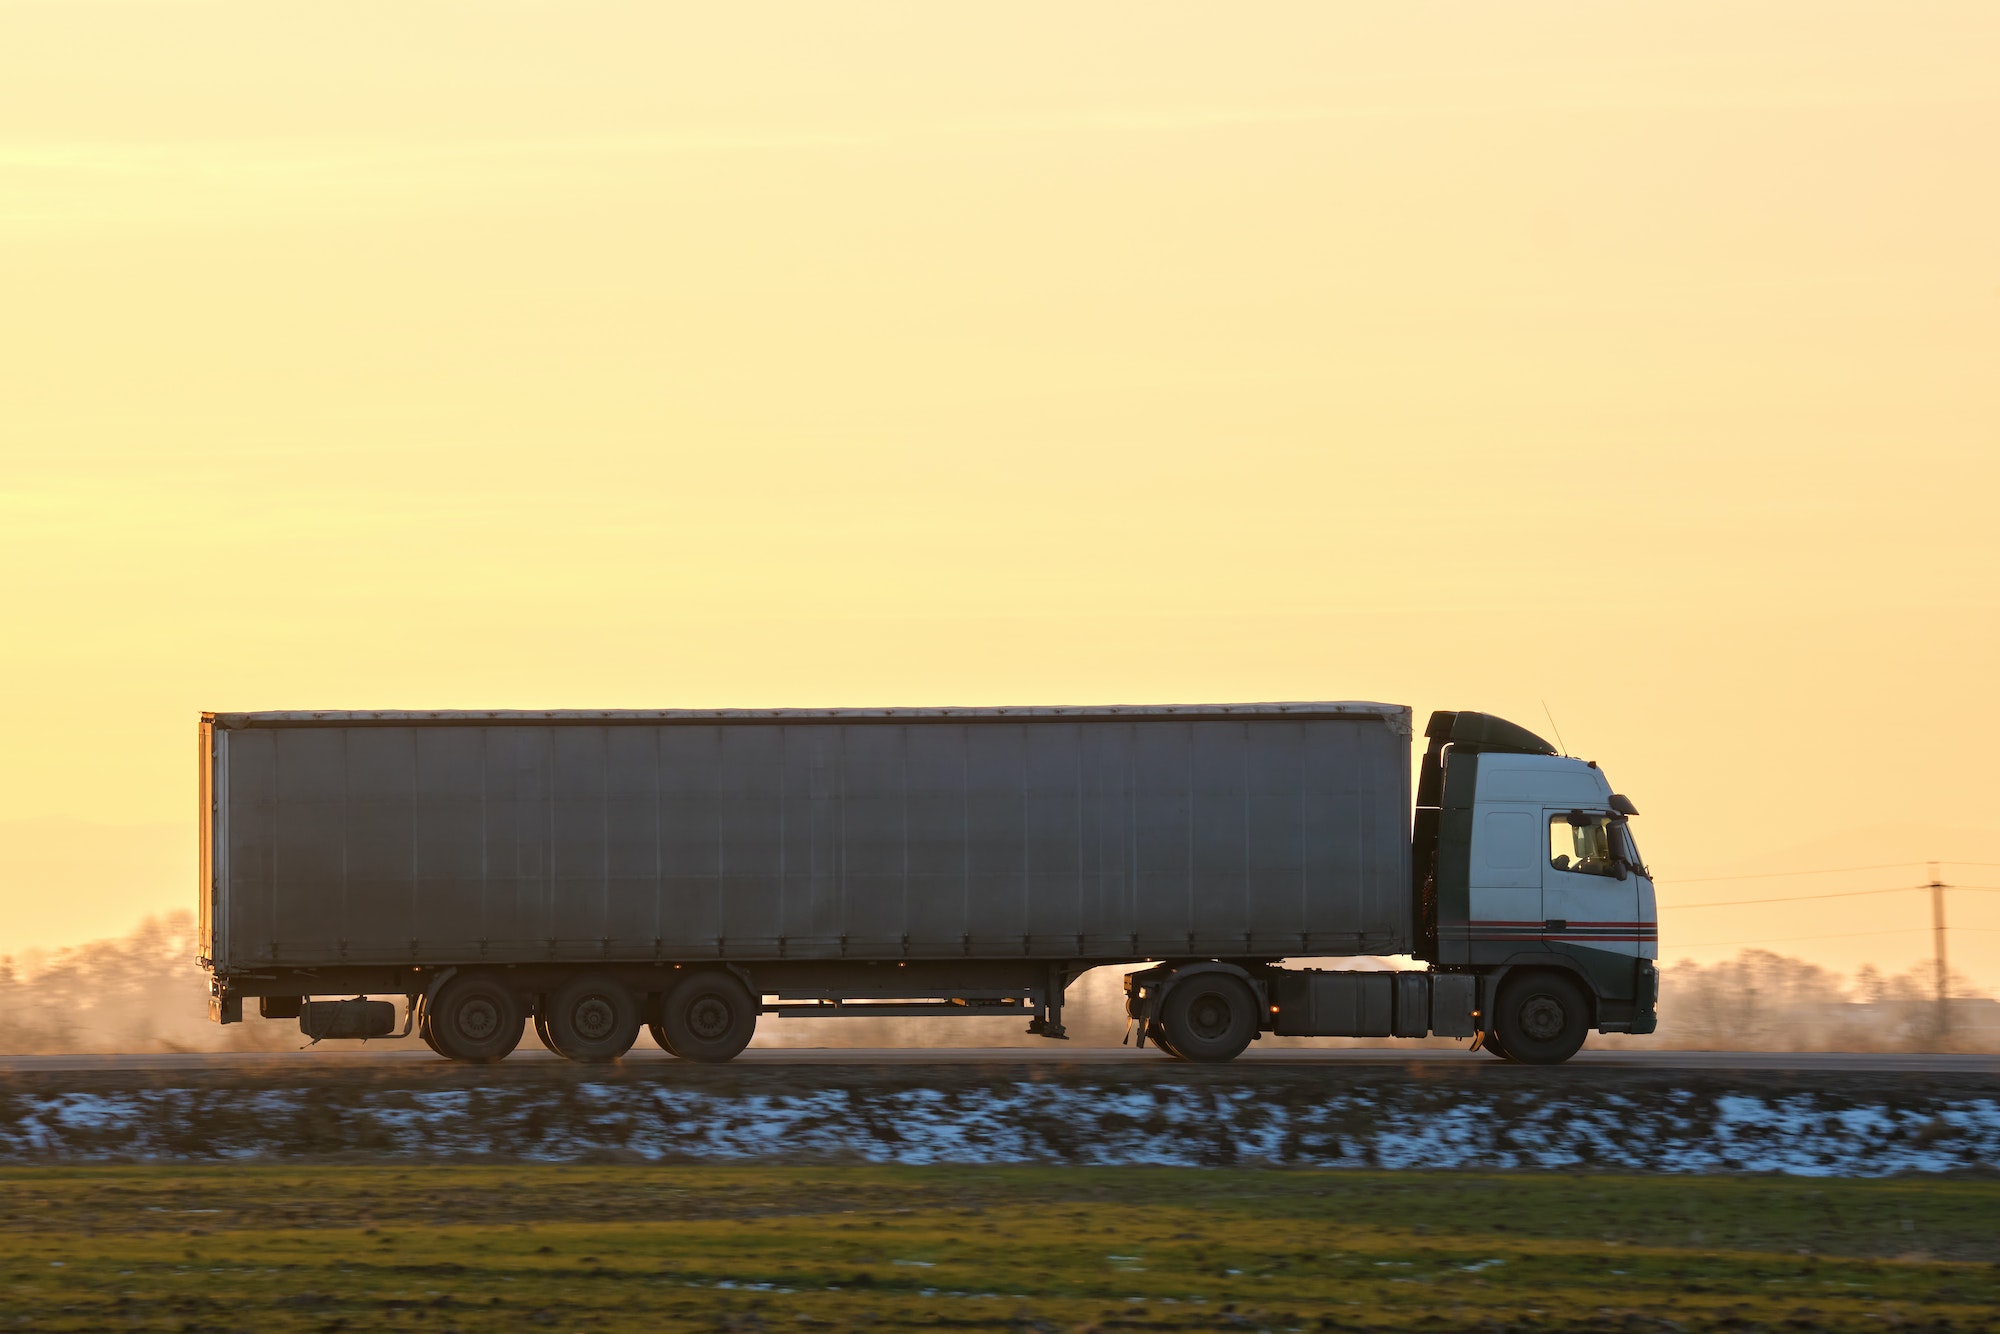 Semi-truck with cargo trailer driving on highway hauling goods in evening